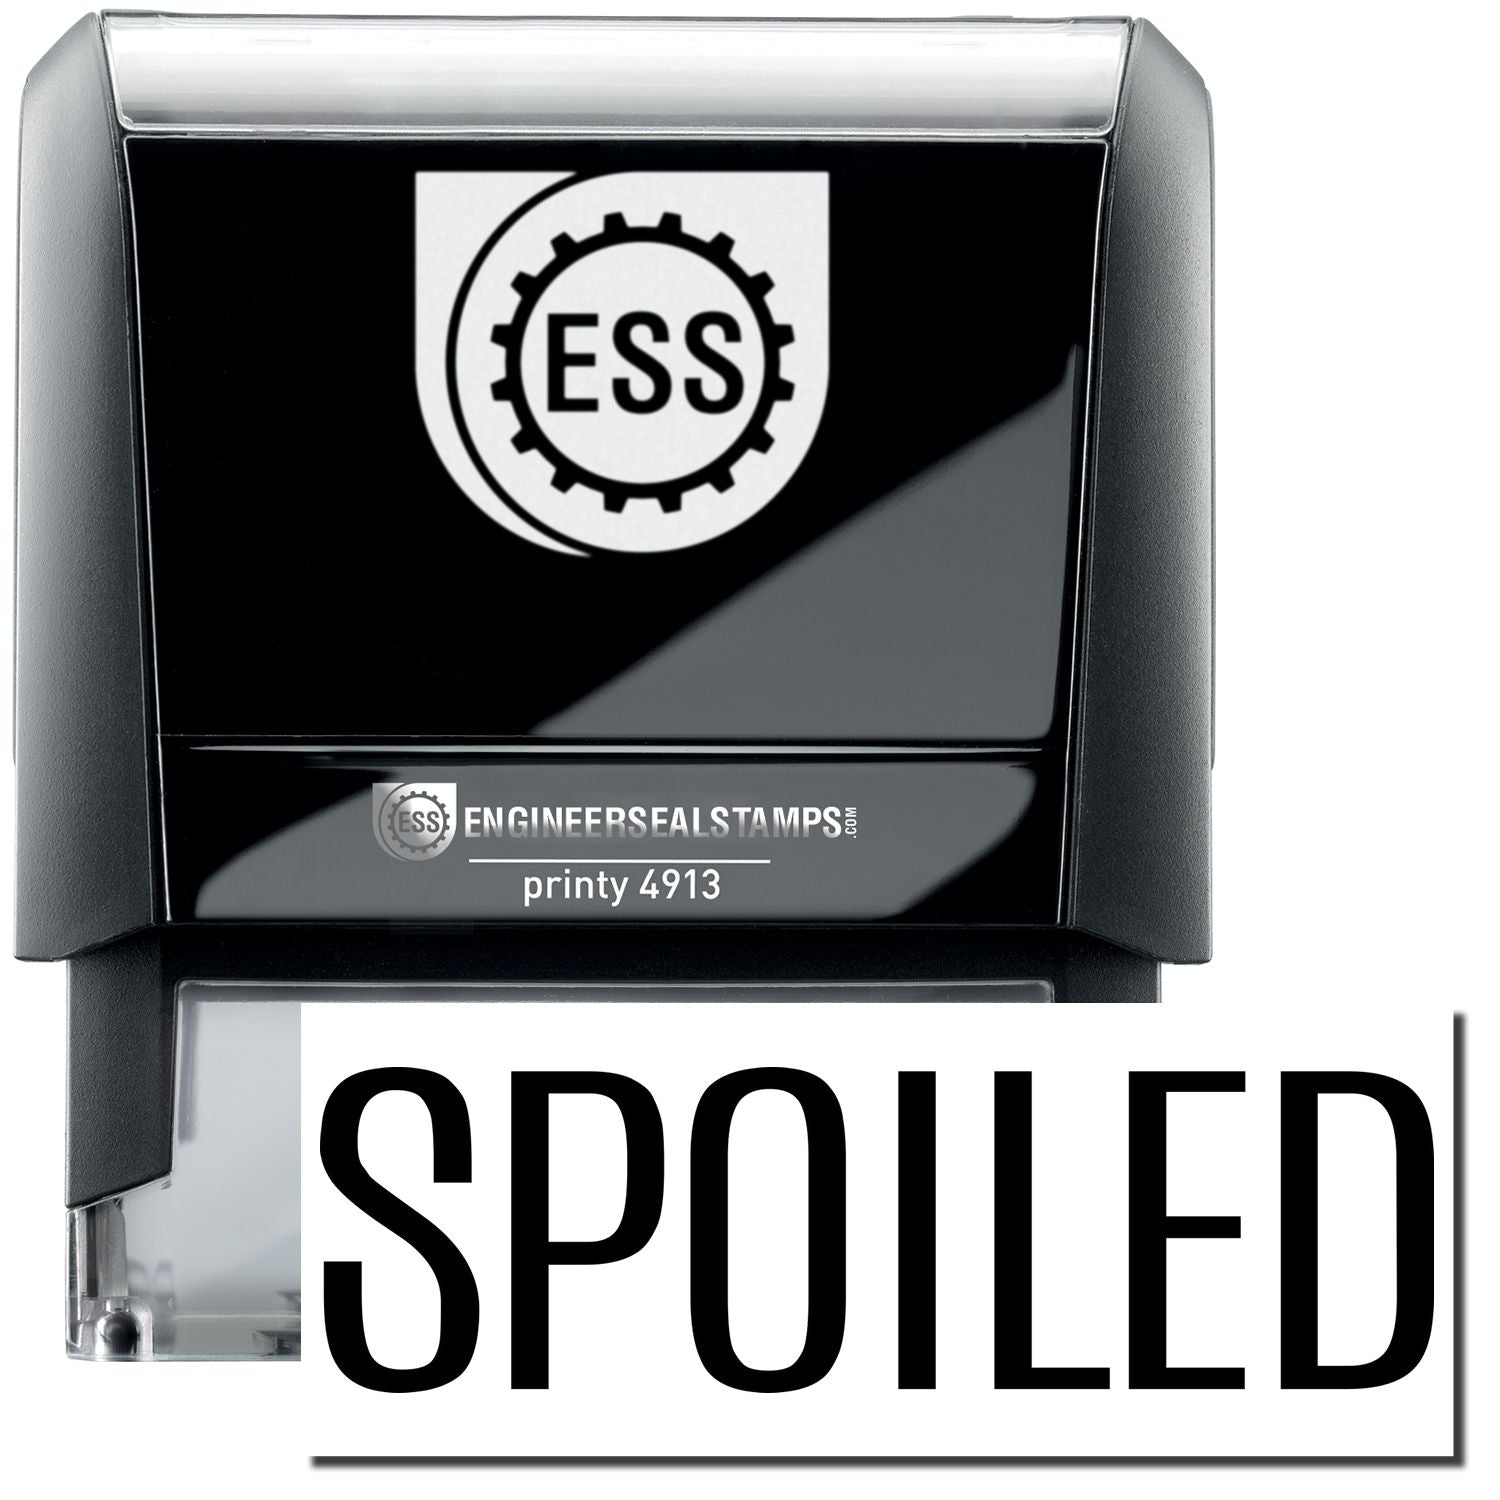 A self-inking stamp with a stamped image showing how the text "SPOILED" in a large font is displayed by it after stamping.